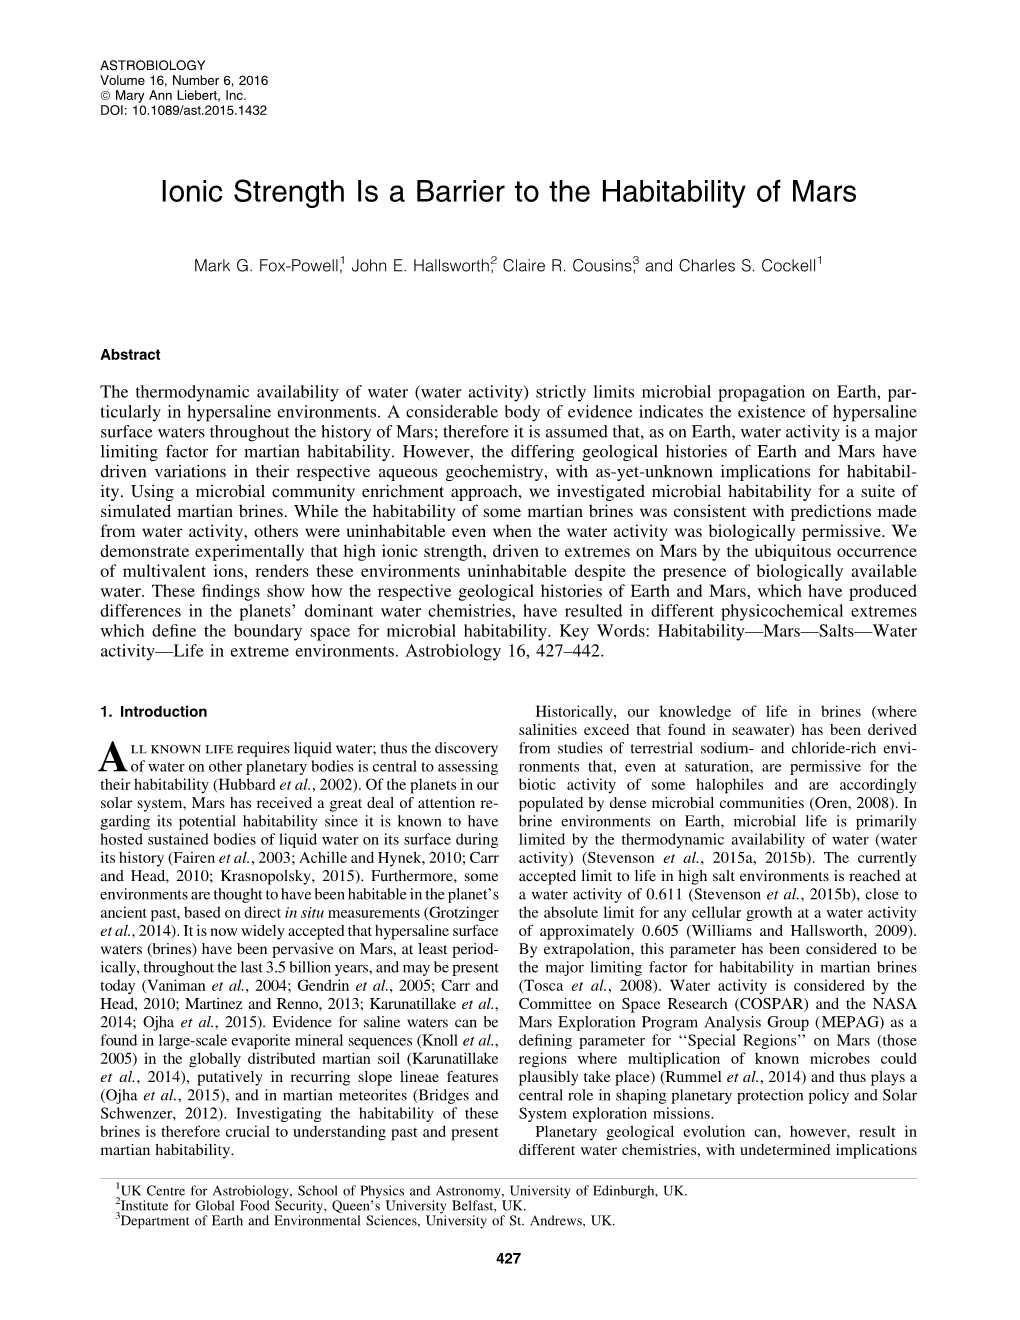 Ionic Strength Is a Barrier to the Habitability of Mars